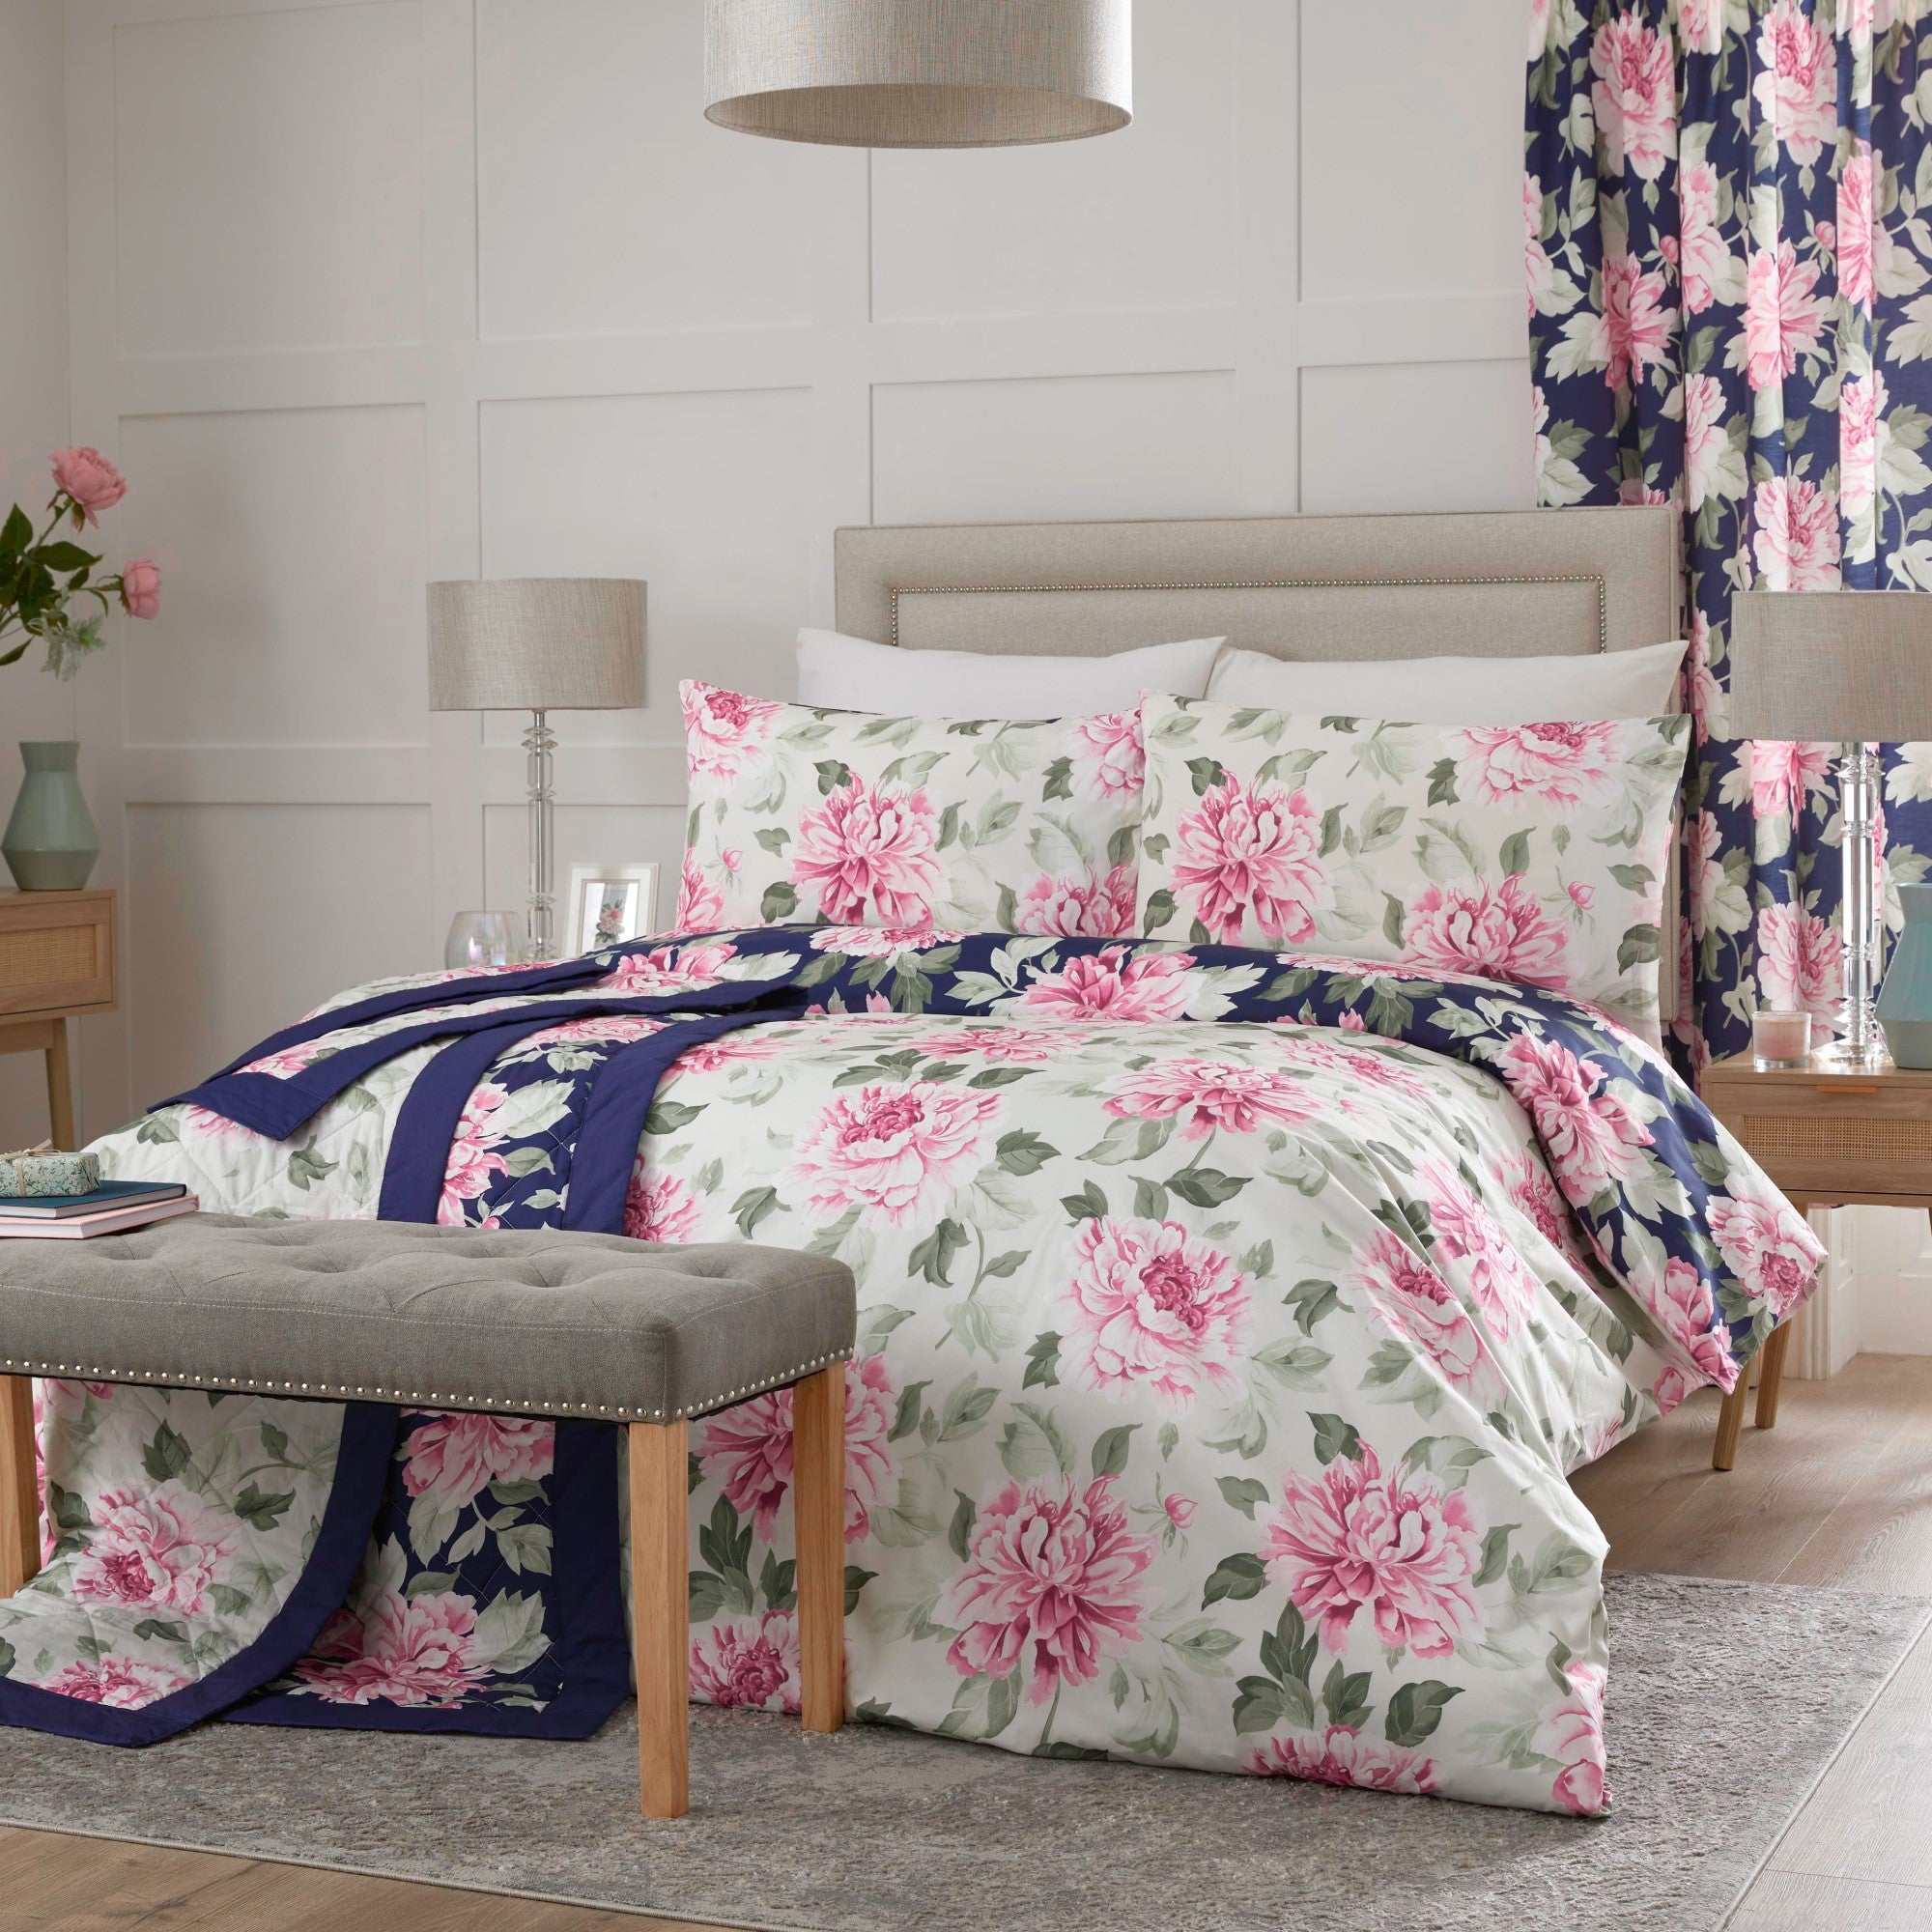 Bedspread Kirsten by Dreams And Drapes Design in Pink/Blue